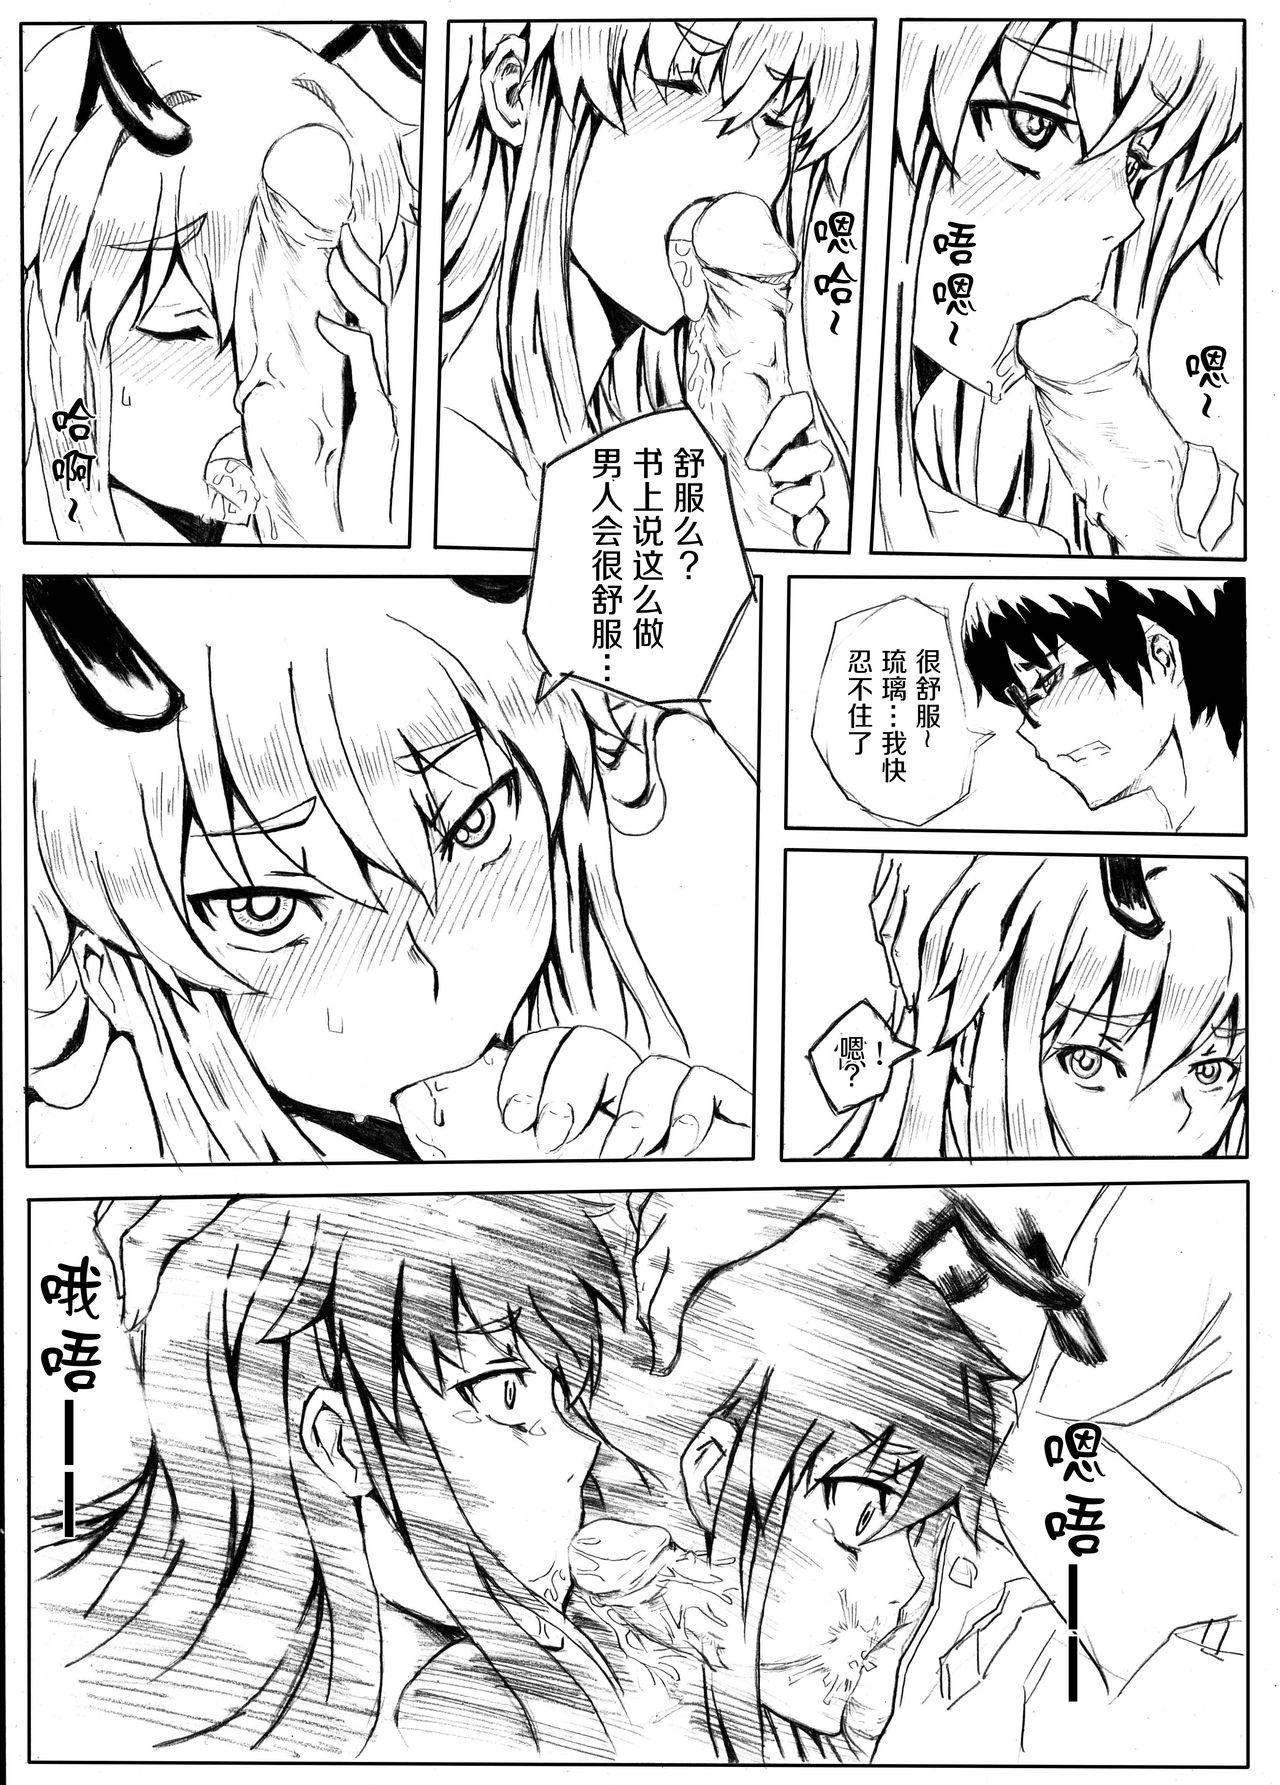 Cuckold [Shuseikan(Chinese Animation-School Shock)] Don`t Leave Me Alone 201108 [Chinese]（不想记名汉化） - School shock Amante - Page 10